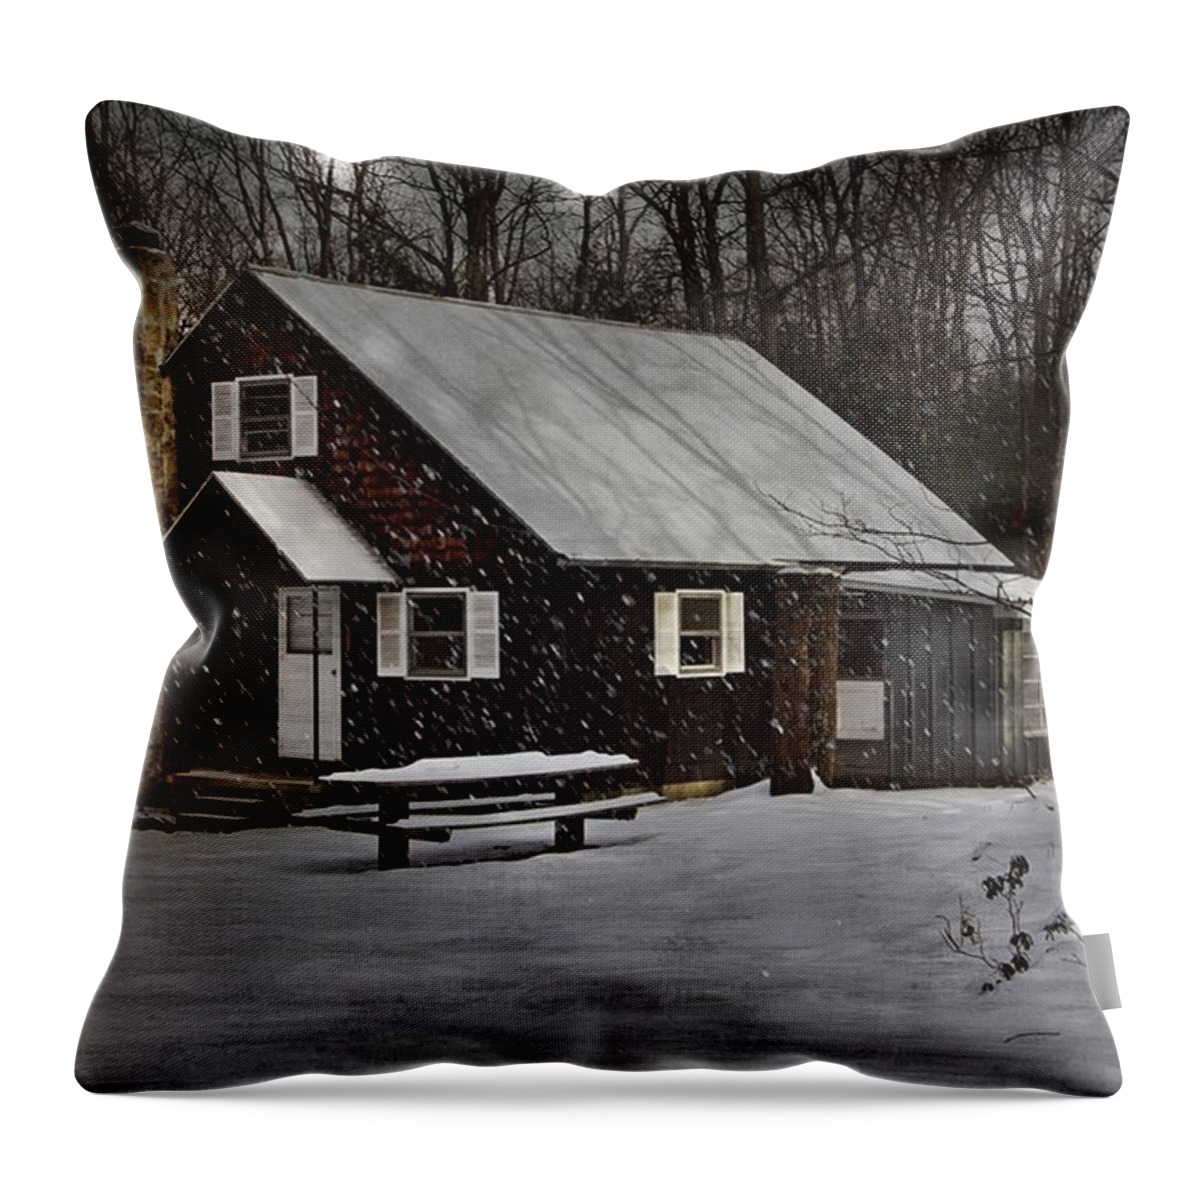 Cabin Throw Pillow featuring the photograph Cabin In The Woods by Stephanie Calhoun